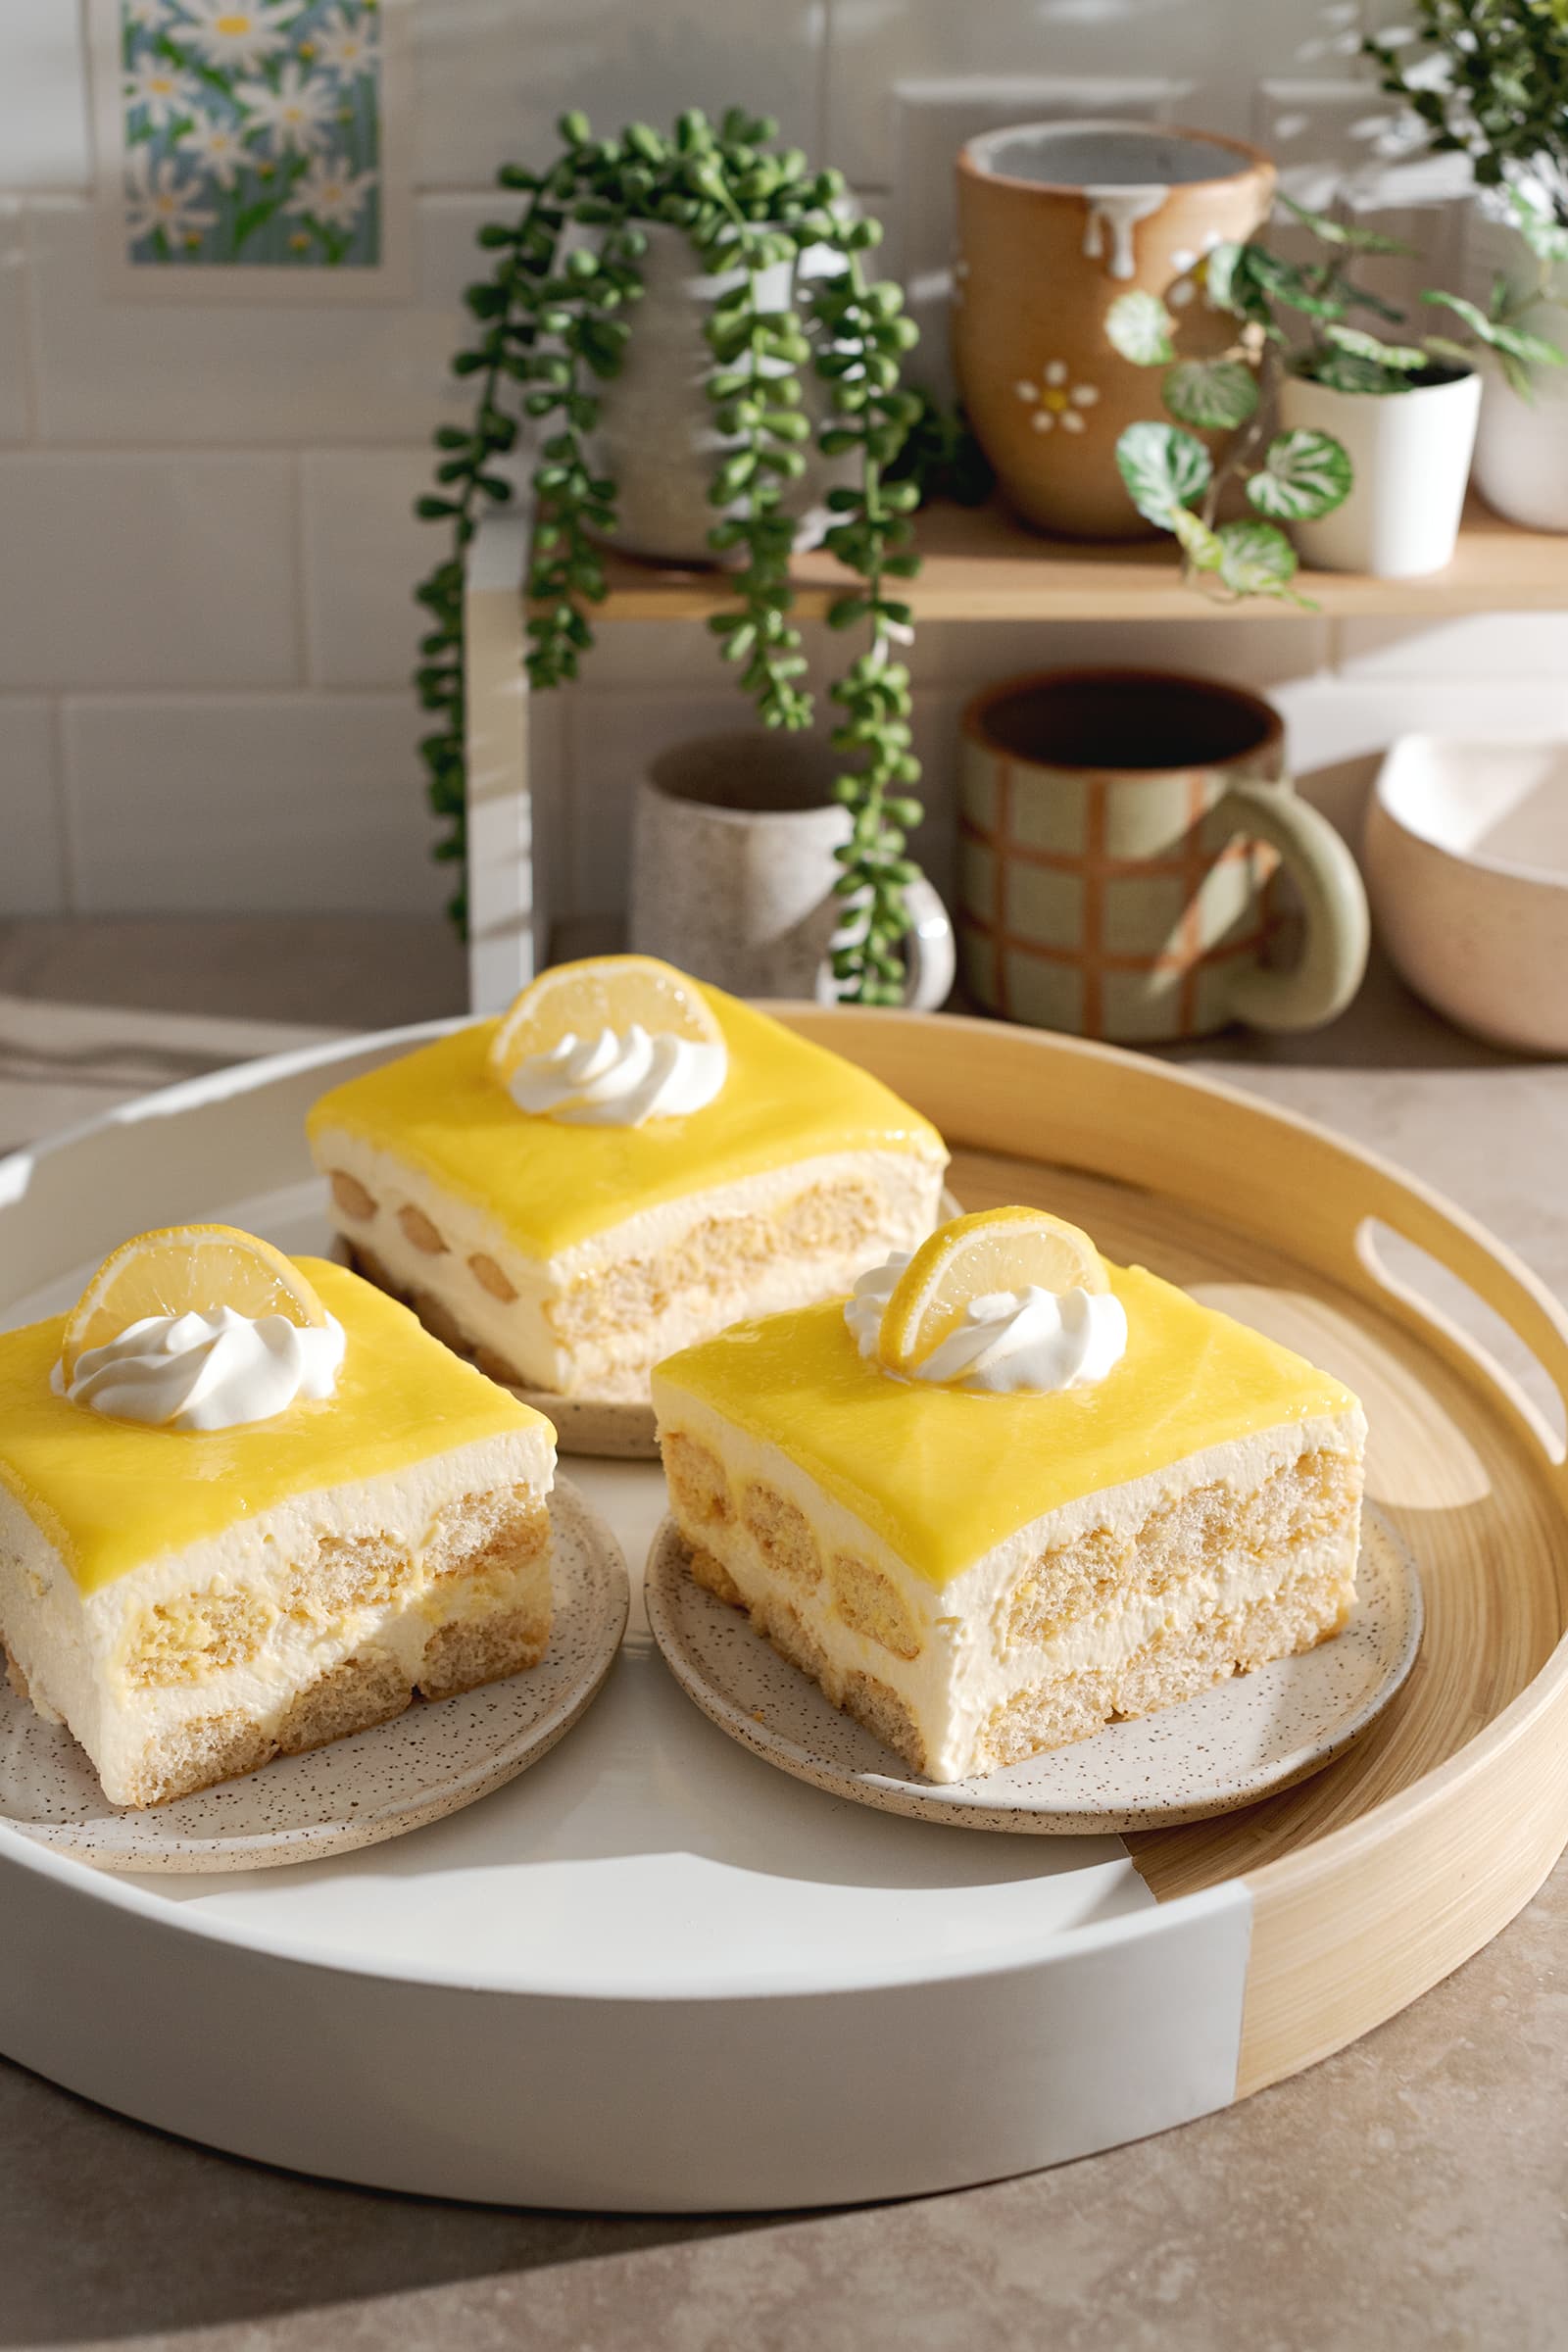 Three slices of limoncello tiramisu on a round platter in front of a shelf with plants and mugs.